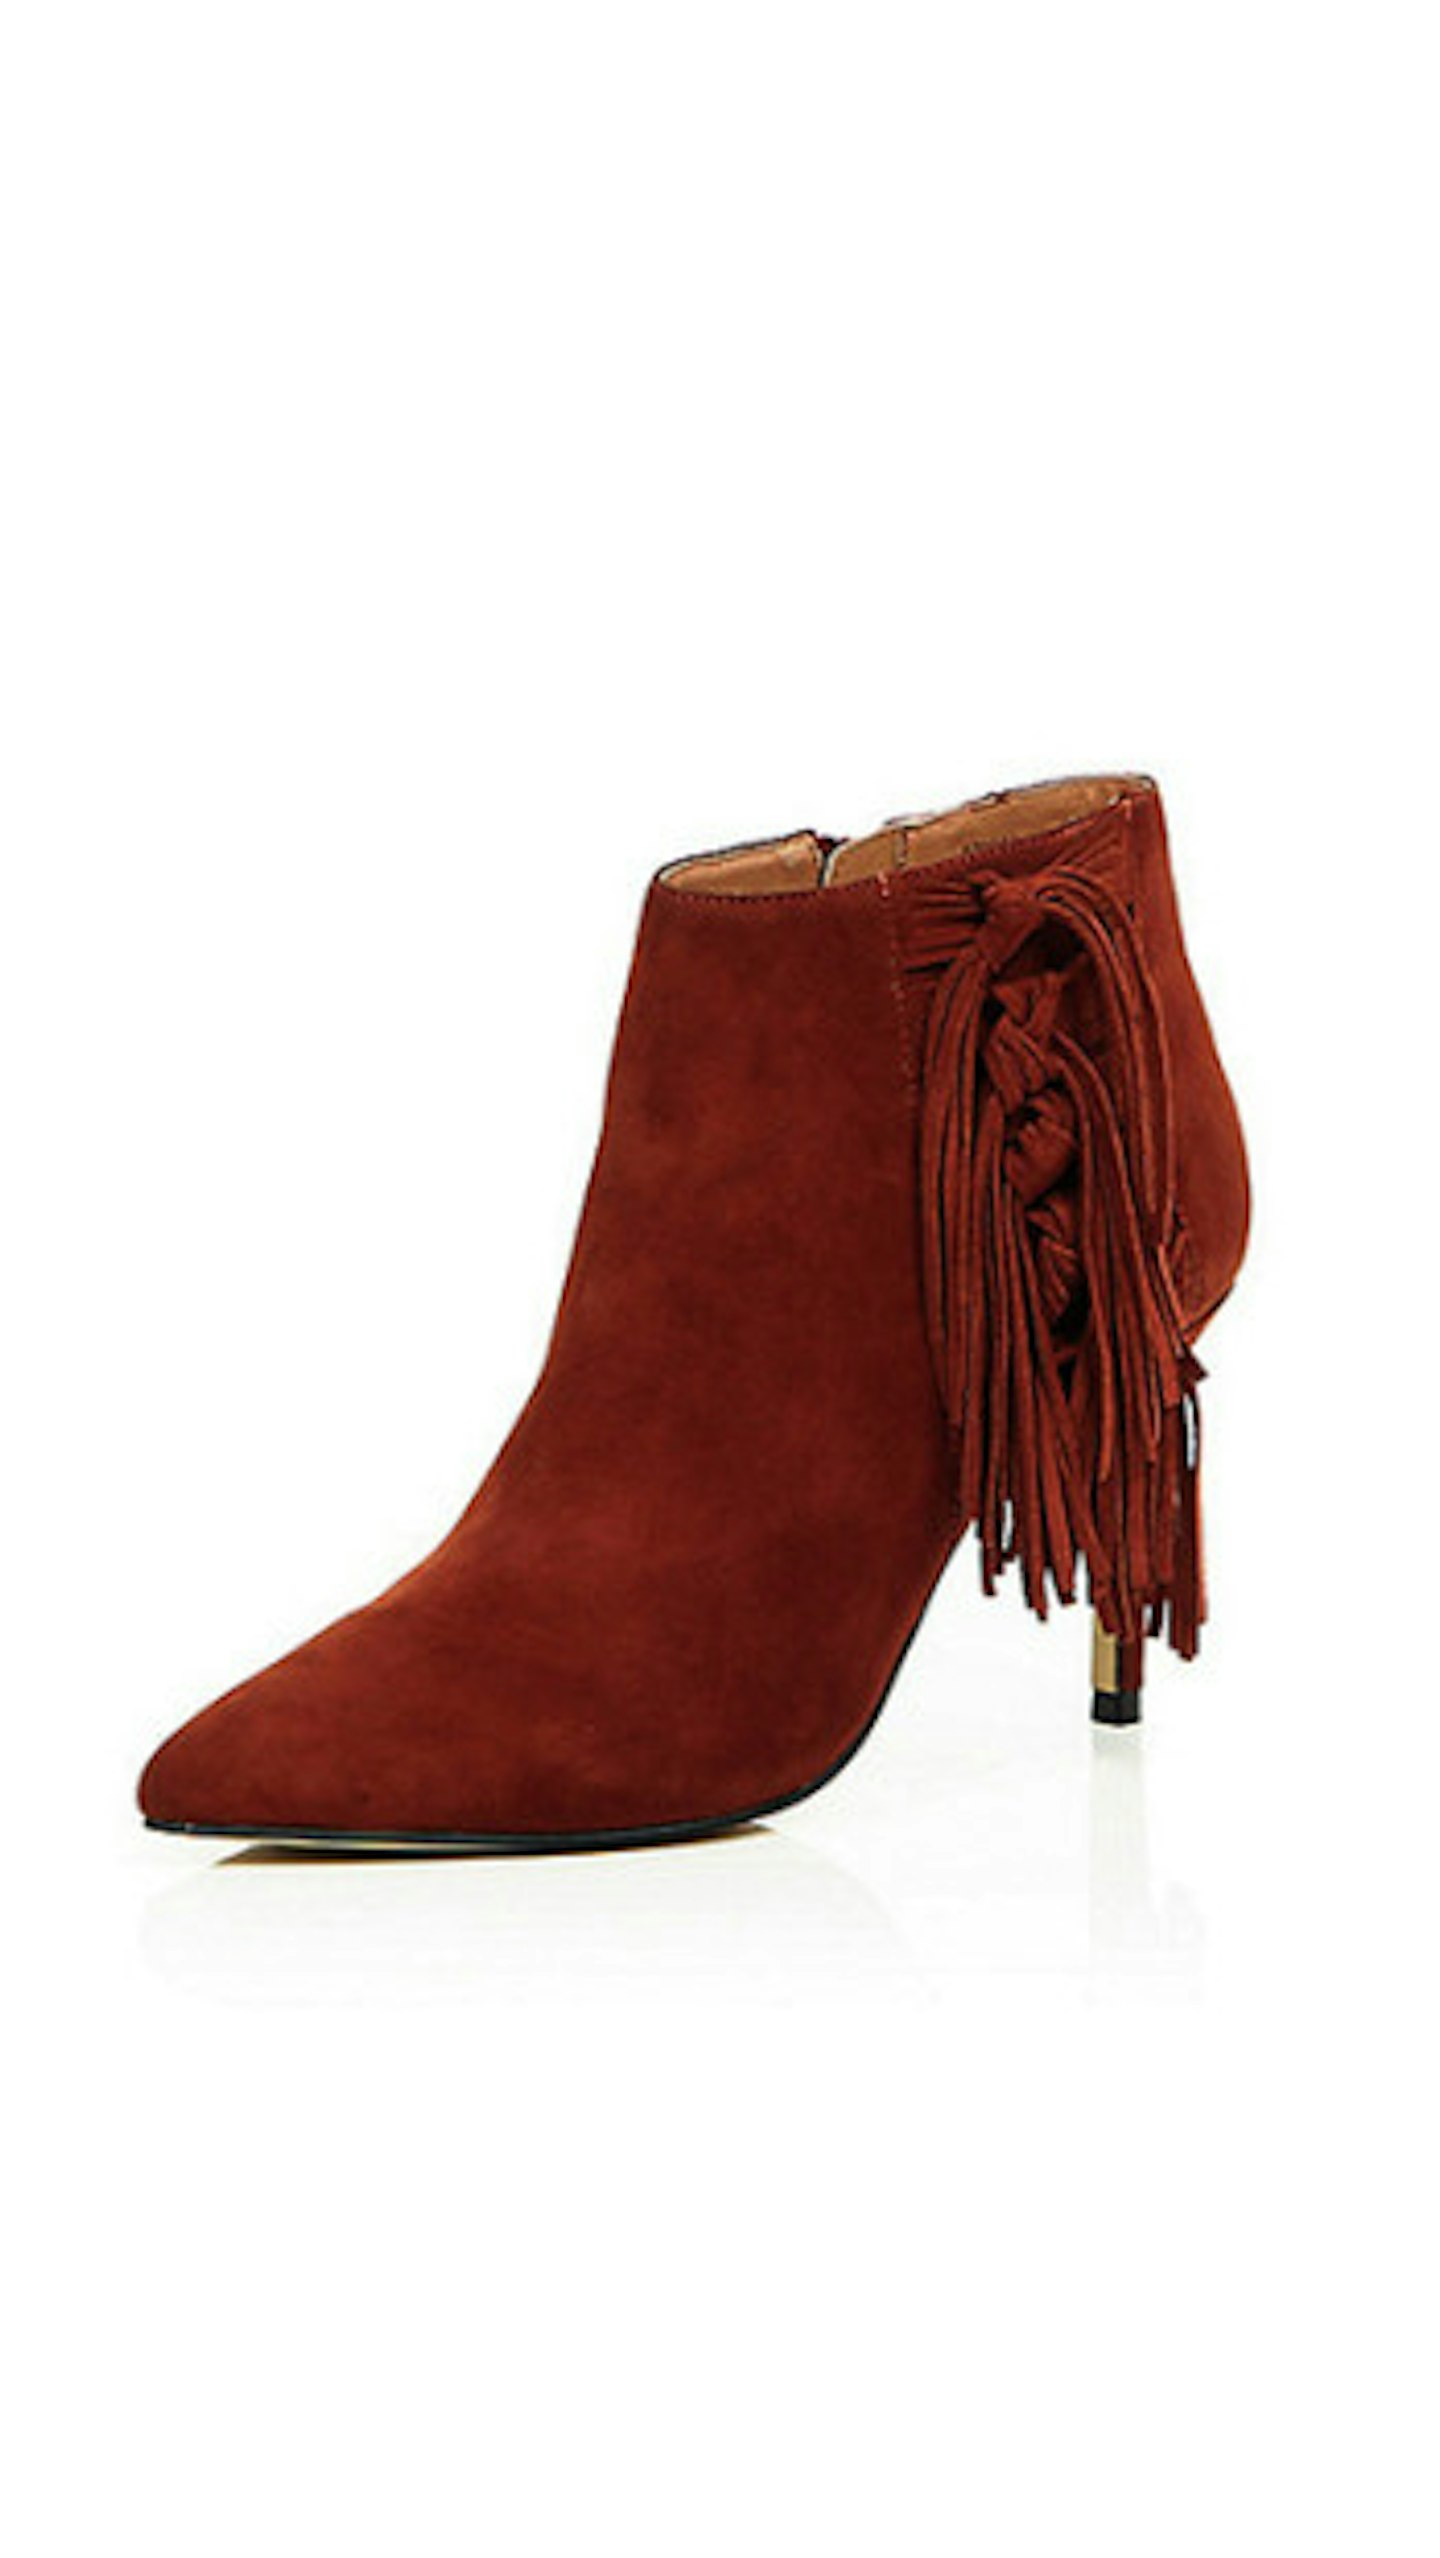 Brown suede fringed heeled boots, £70